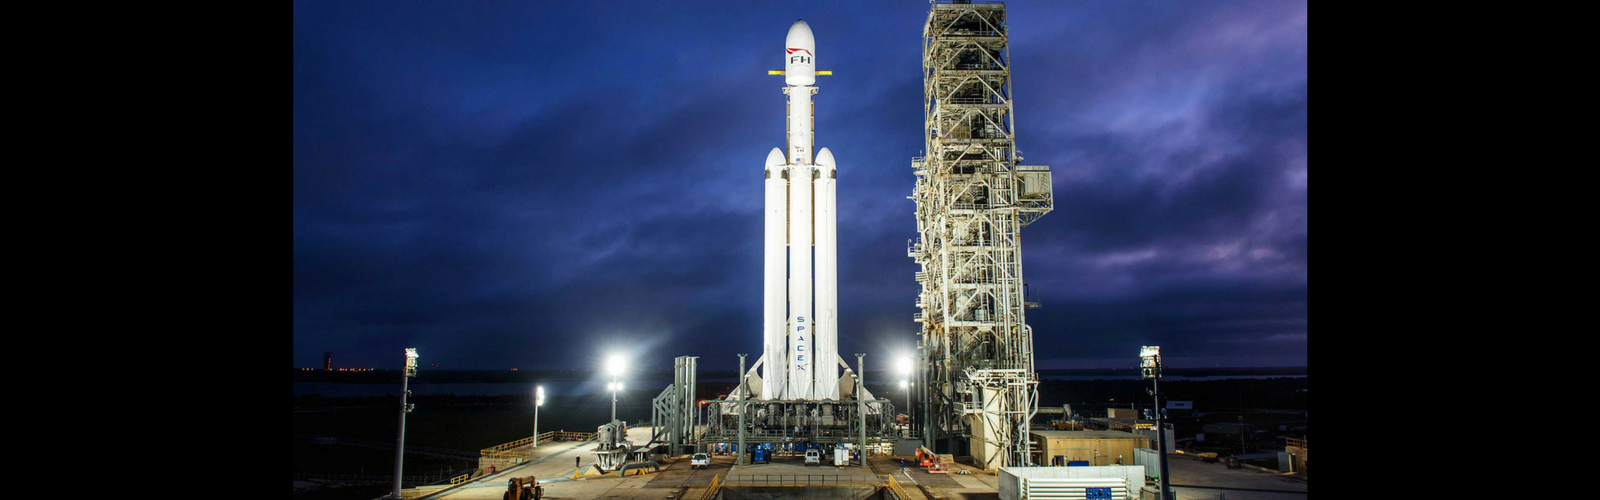 7 Places on the Treasure Coast to Watch SpaceX Falcon Heavy Launch